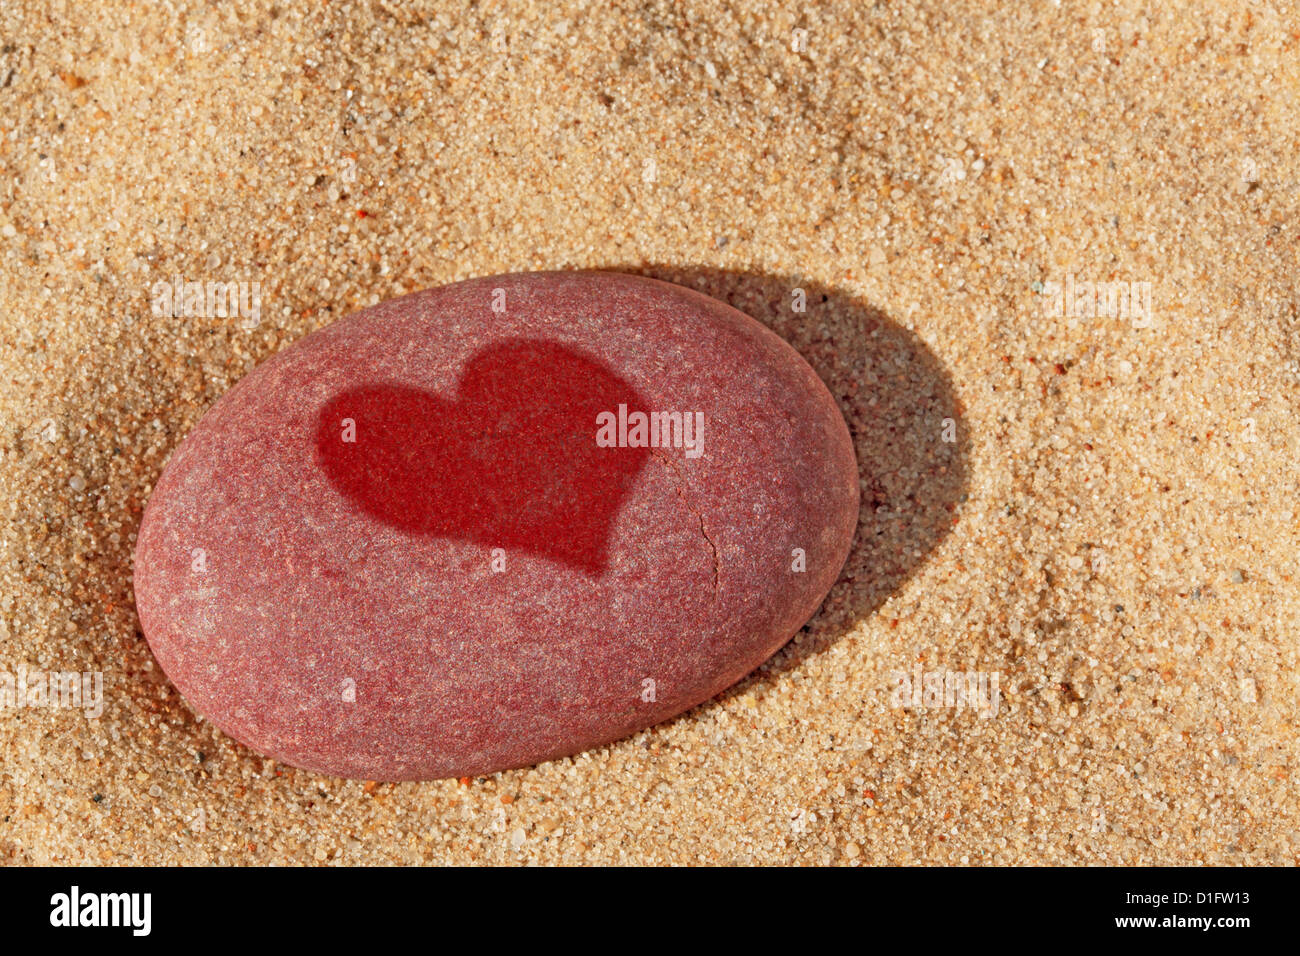 A red pebble on a beach with a wet heart shape upon it. Stock Photo